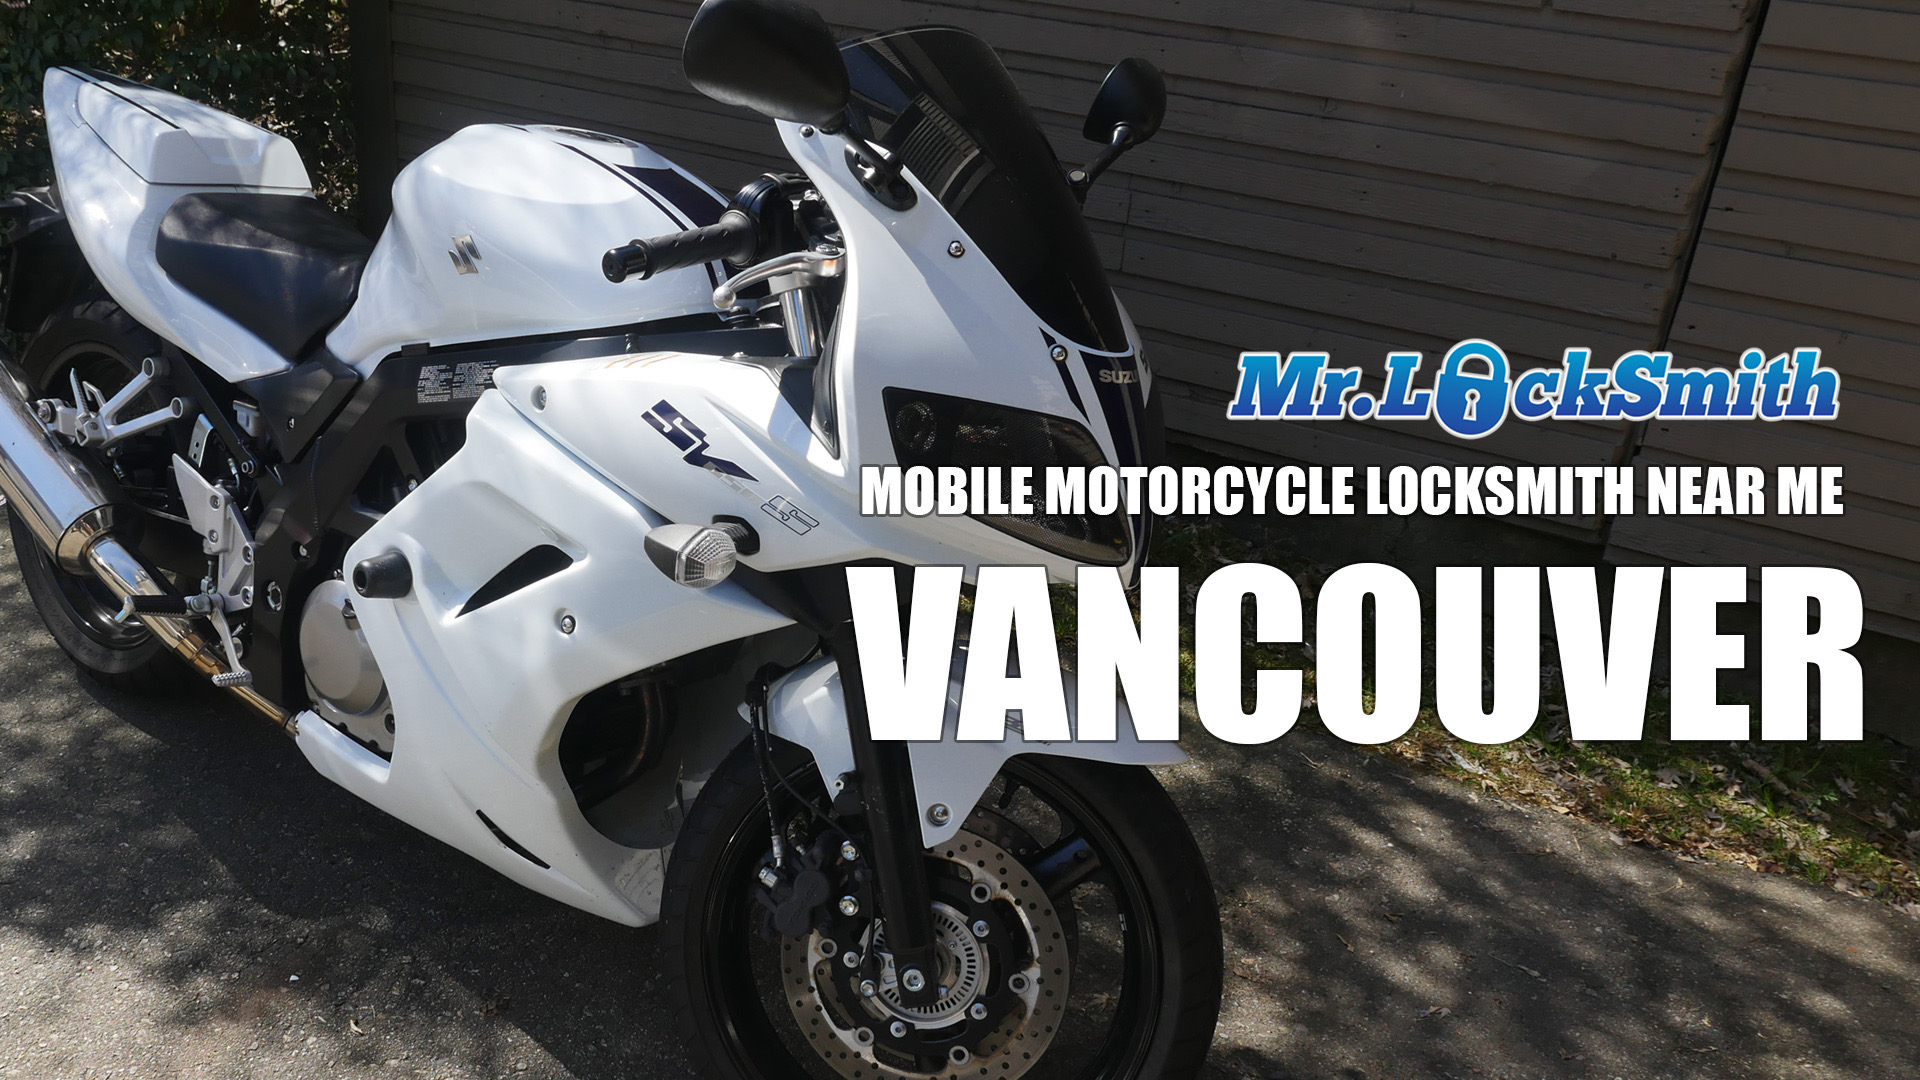 Mobile motorcycle locksmith near me Vancouver